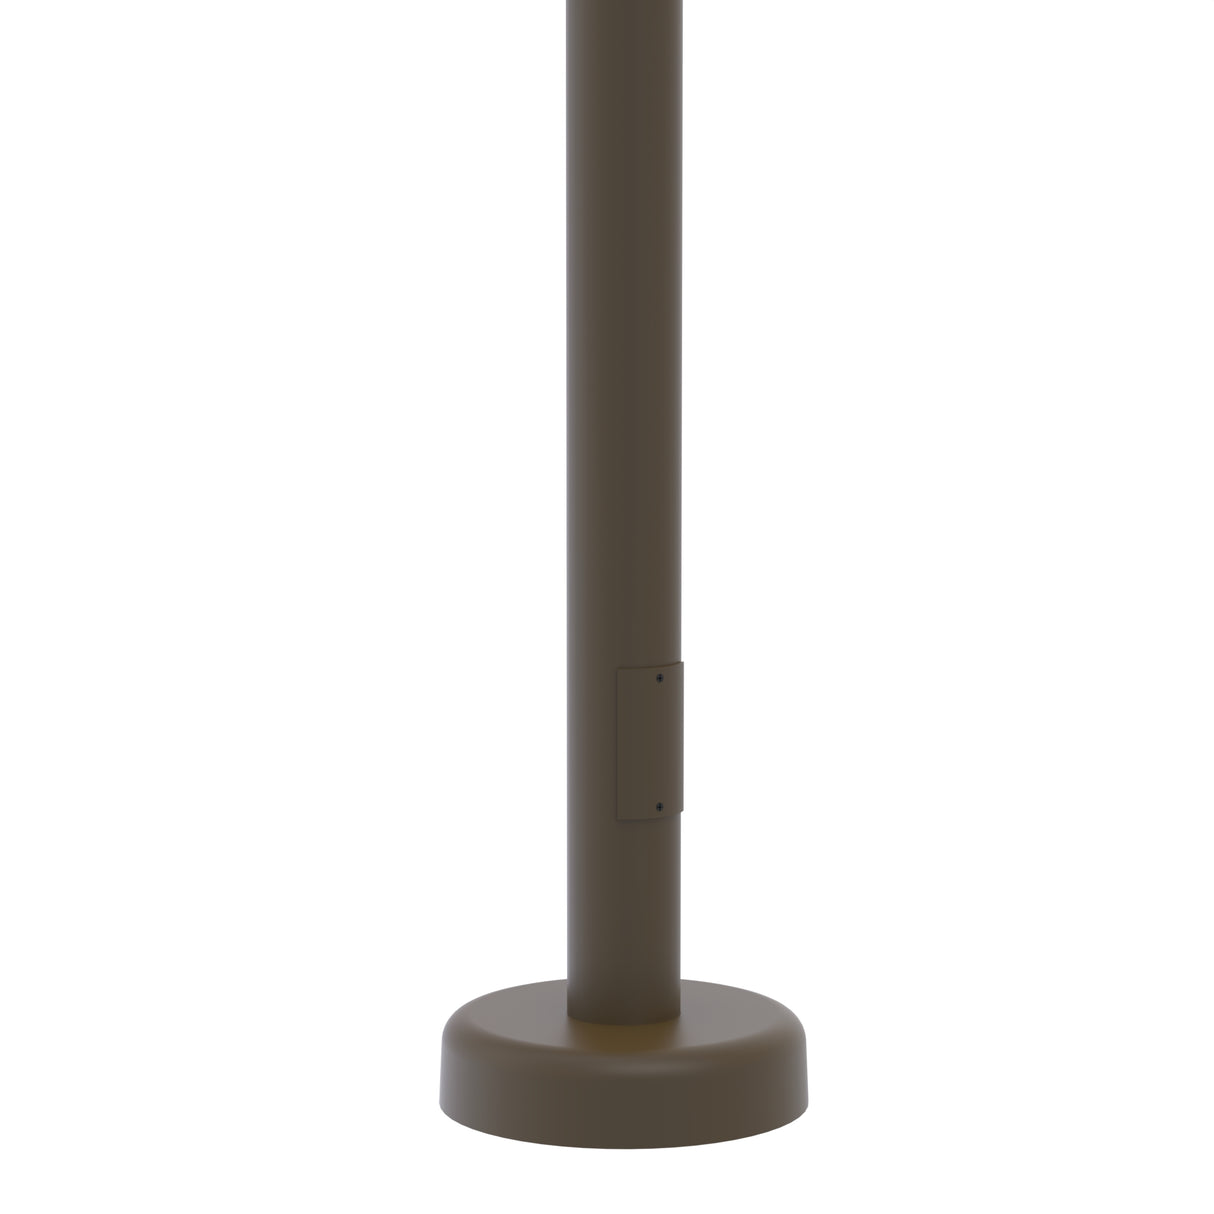 18' Tall x 5.0" Base OD x 3.0" Top OD x 0.156" Thick, Round Tapered Aluminum, Hinged Anchor Base Light Pole